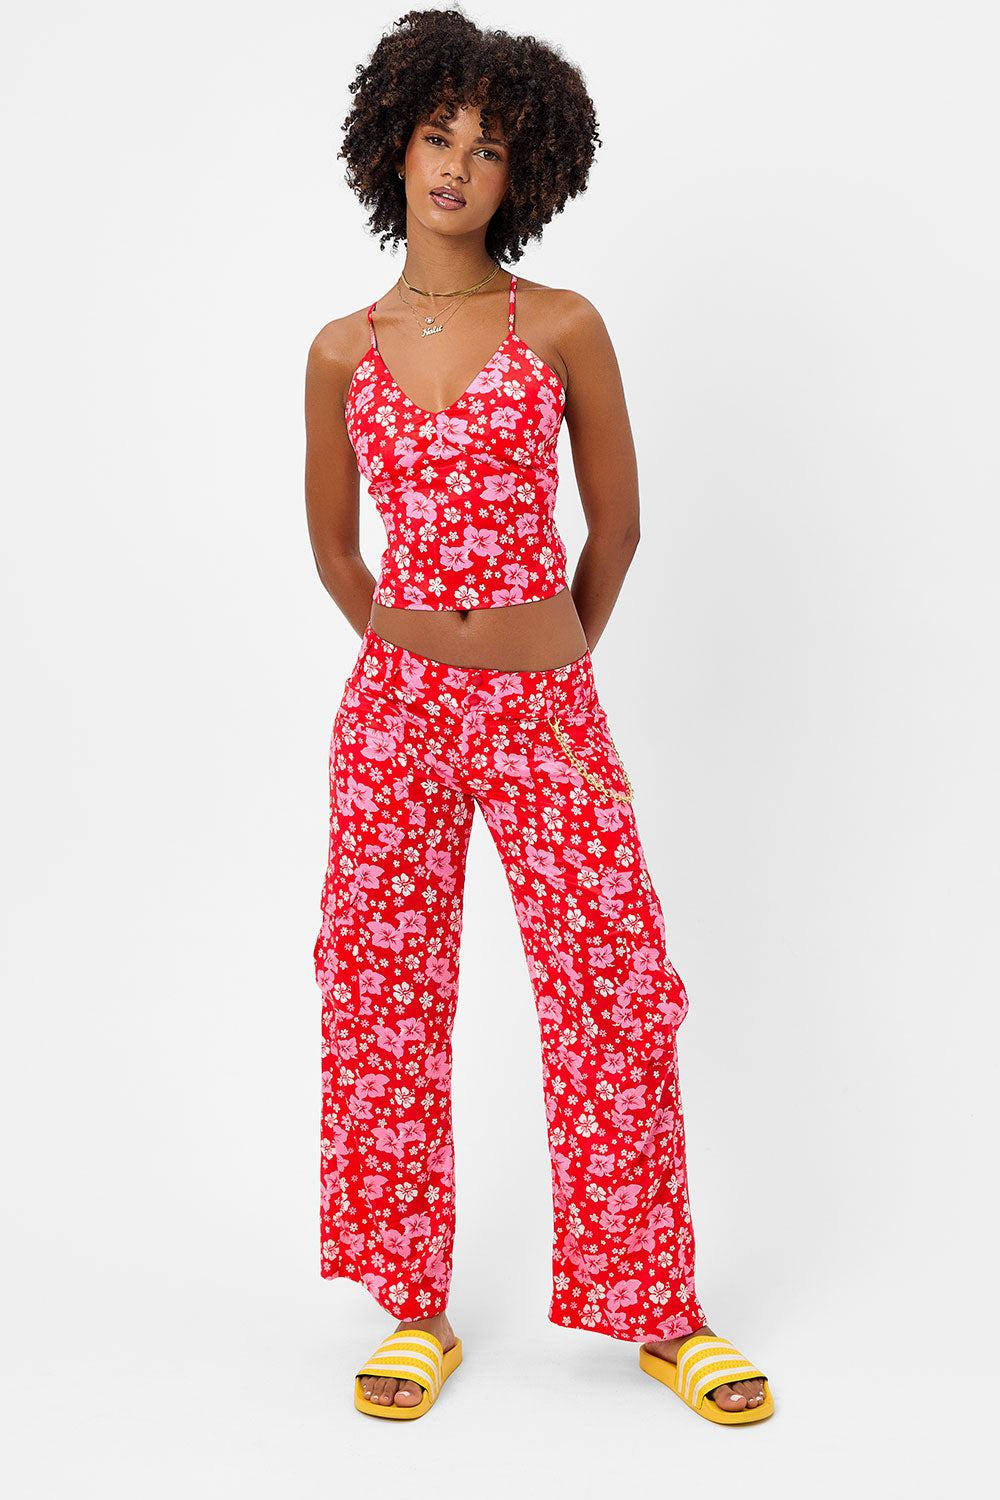 Chilli Satin Floral Cargo Pant - Coconut Girl